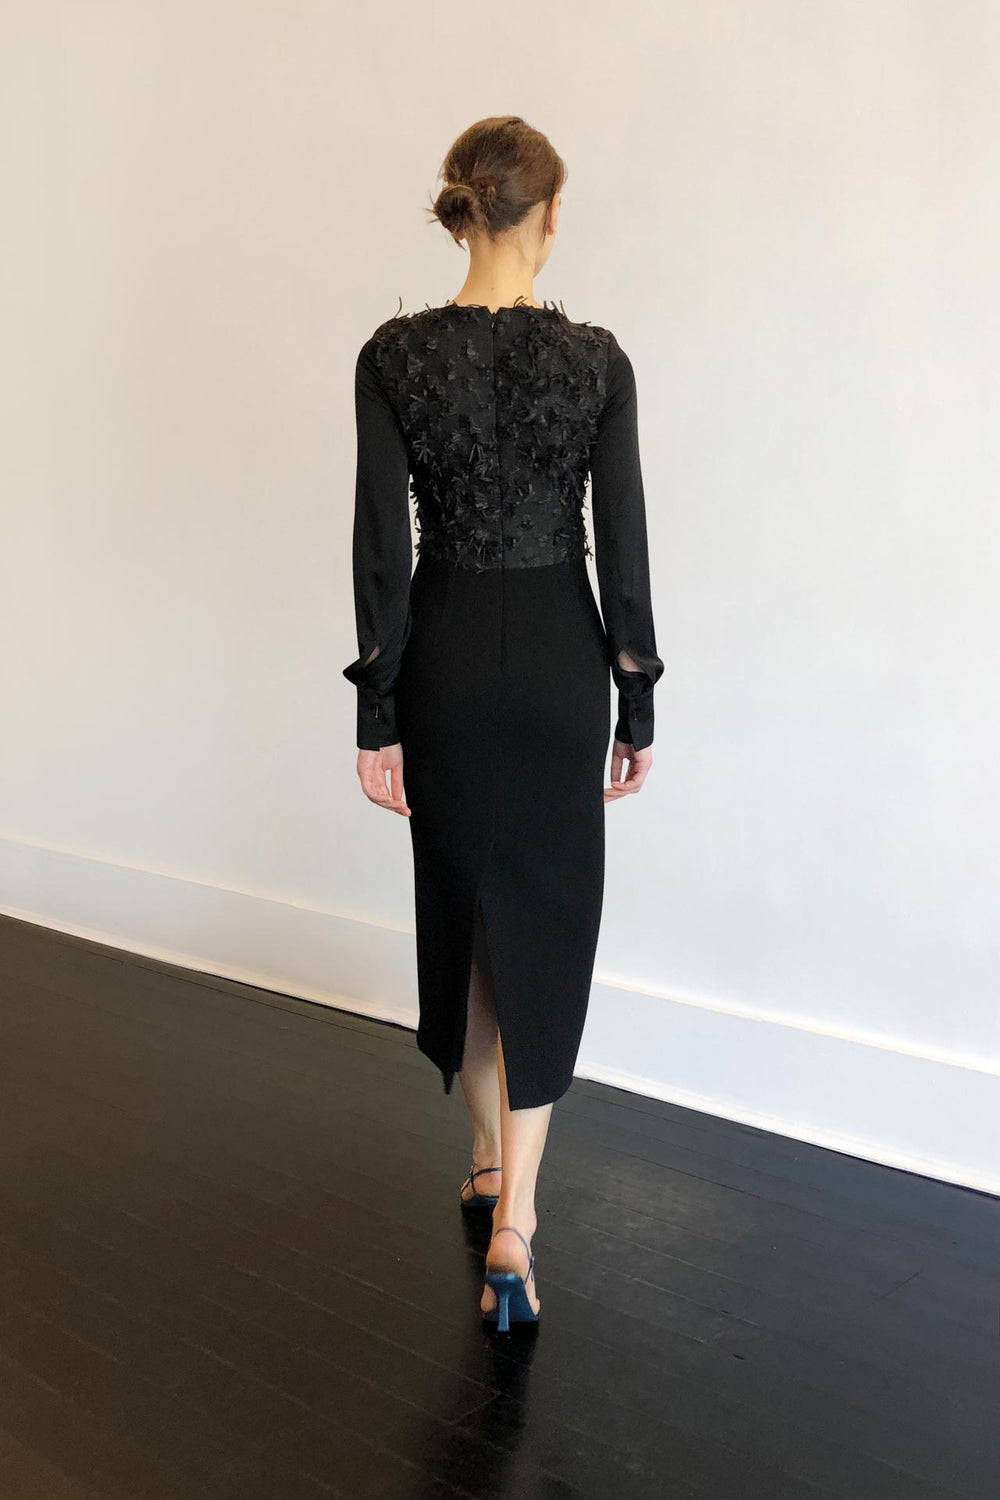 Fashion Designer CARL KAPP collection | Onyx structured cocktail dress with sleeves Black | Sydney Australia